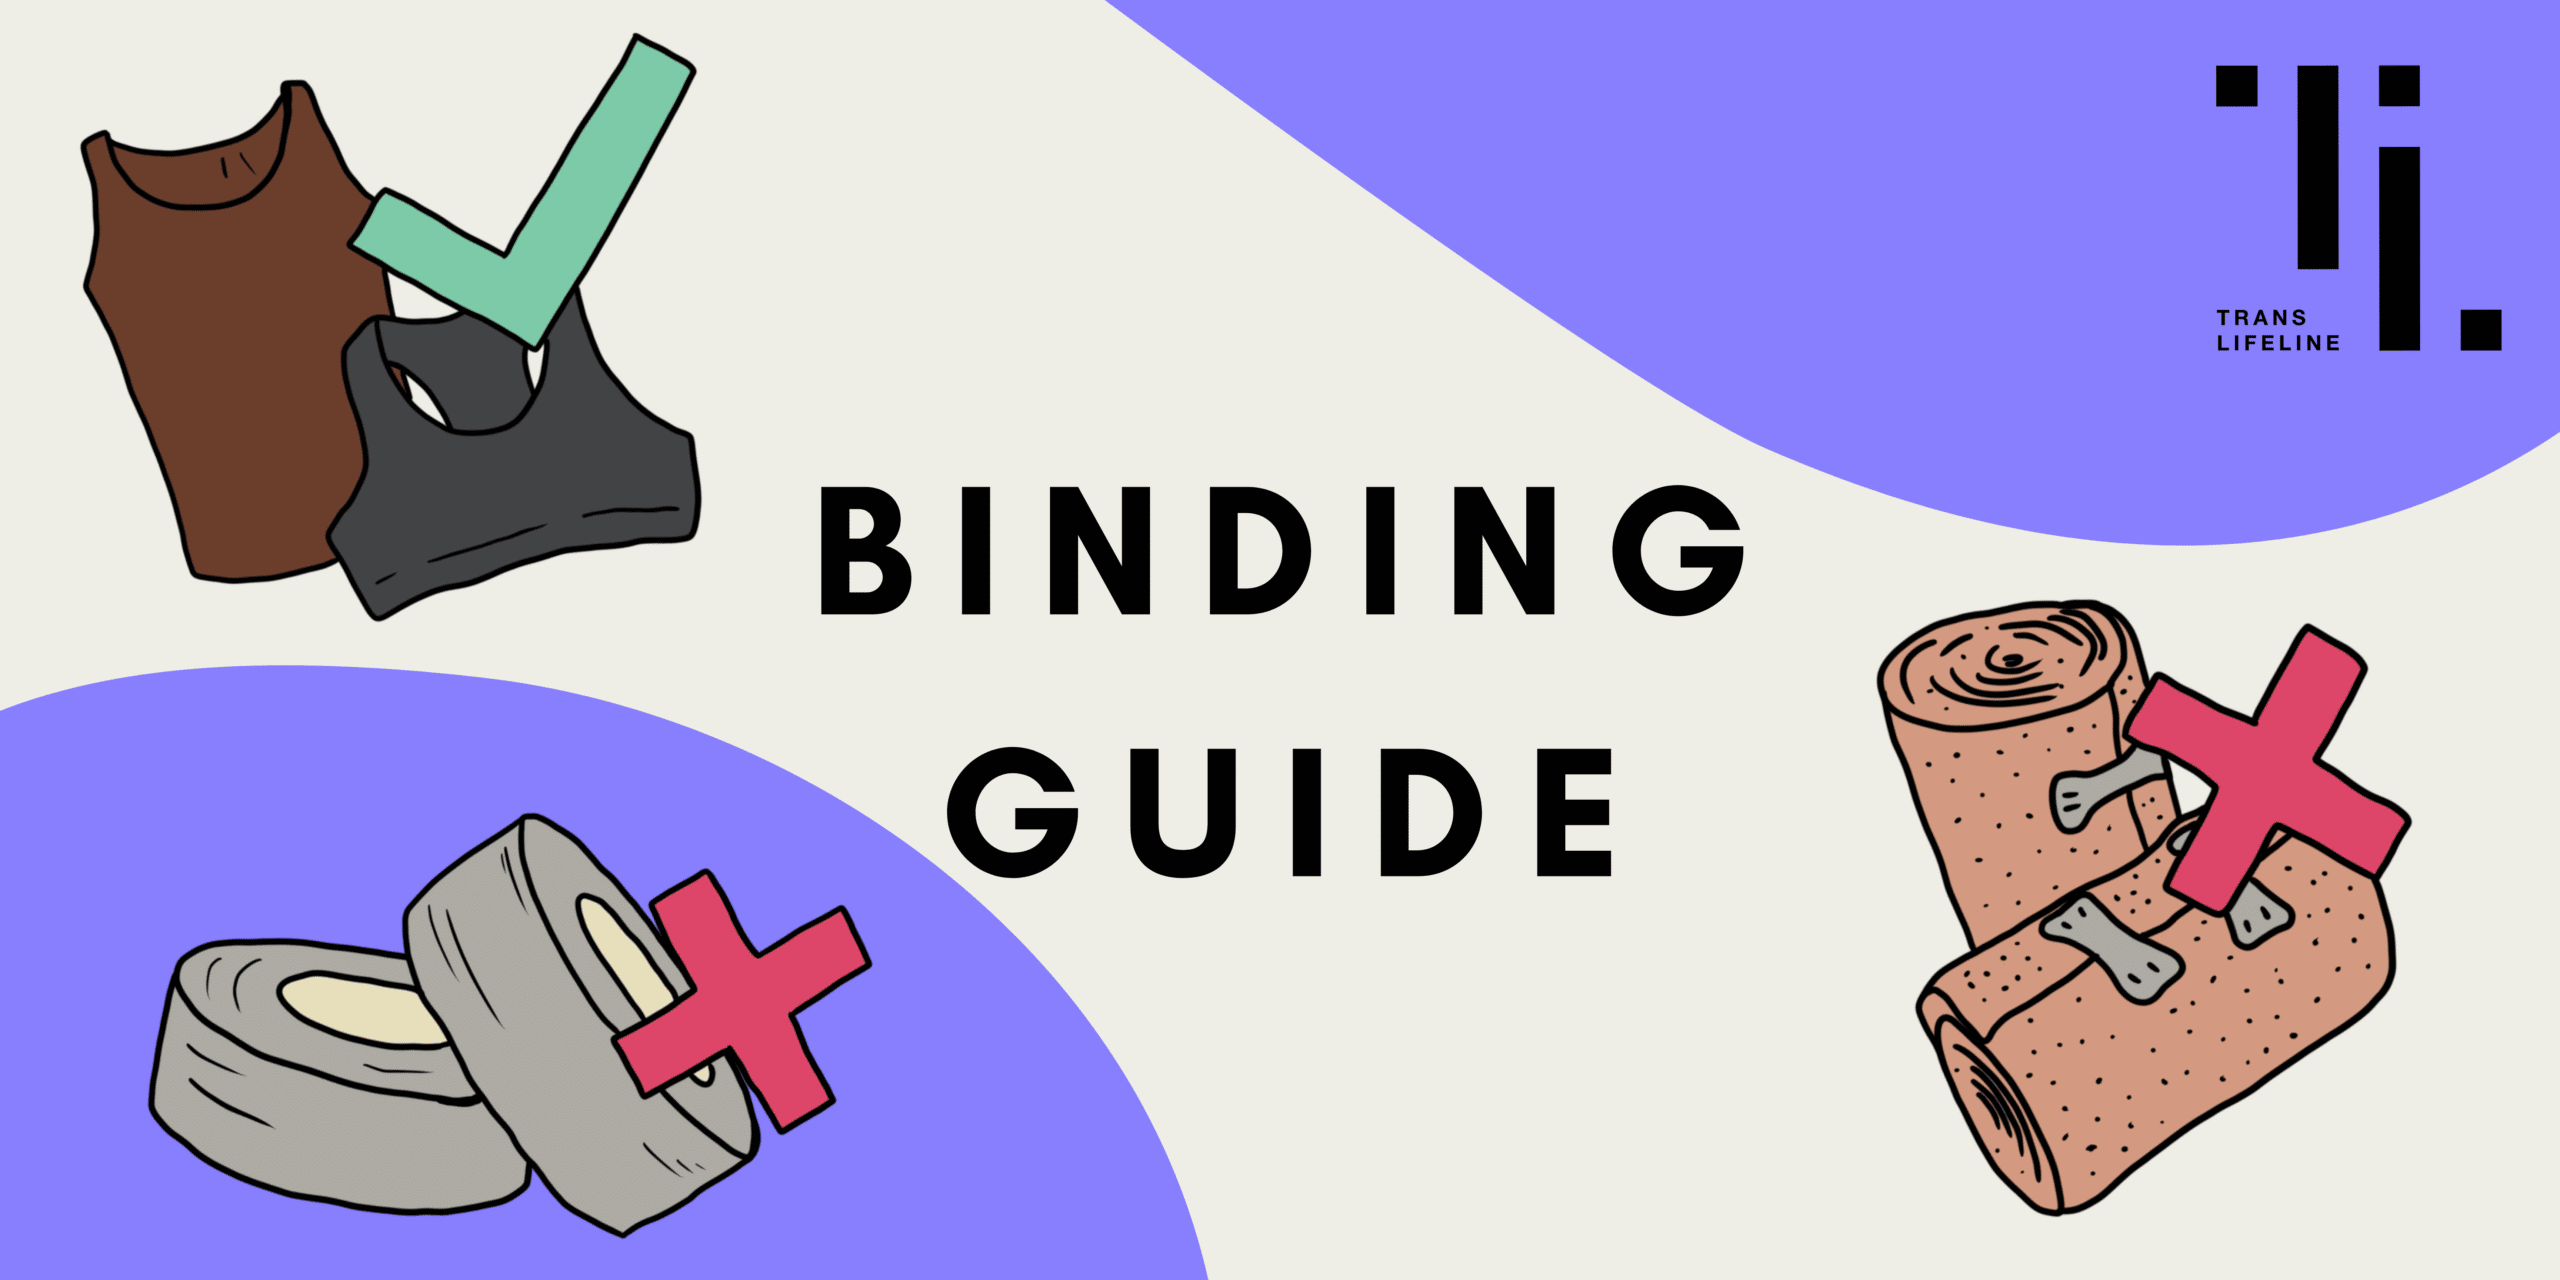 A Binding Guide for All Genders and Gender Expressions - Trans Lifeline